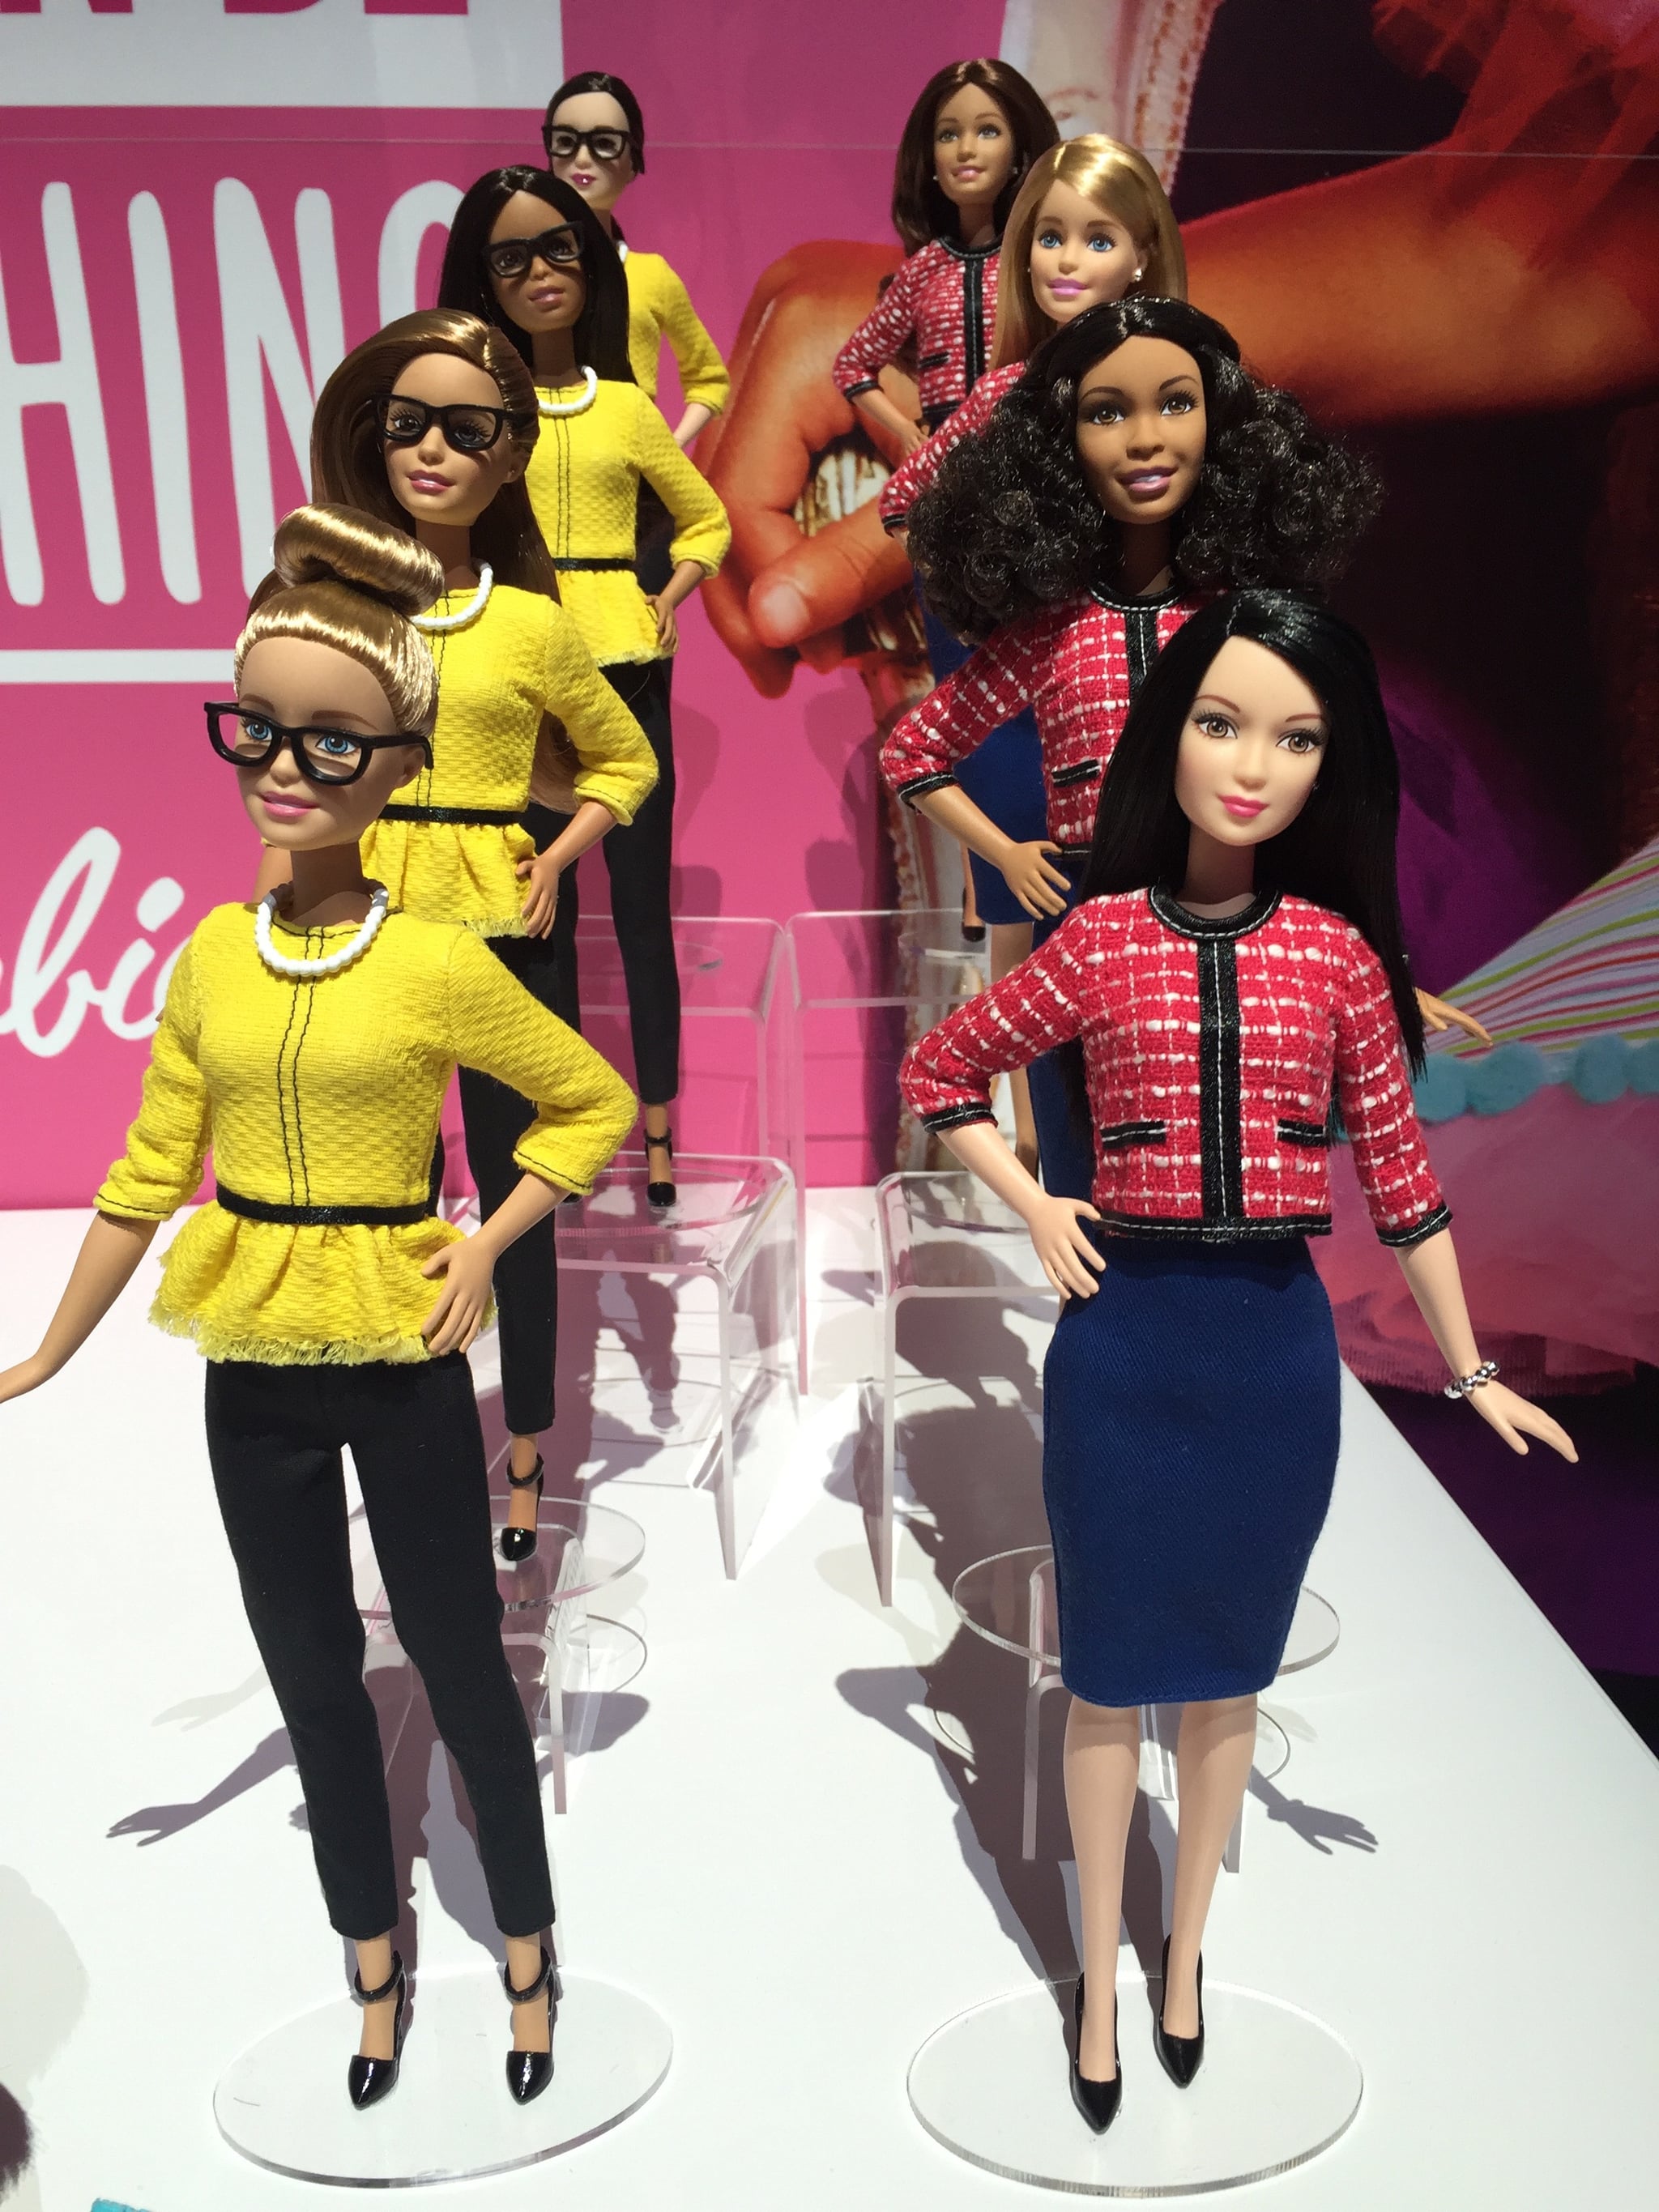 grens Monumentaal opwinding President and Vice President Barbie | These Are the 20 Toys Introduced at  Toy Fair That We're Most Excited For | POPSUGAR Family Photo 7